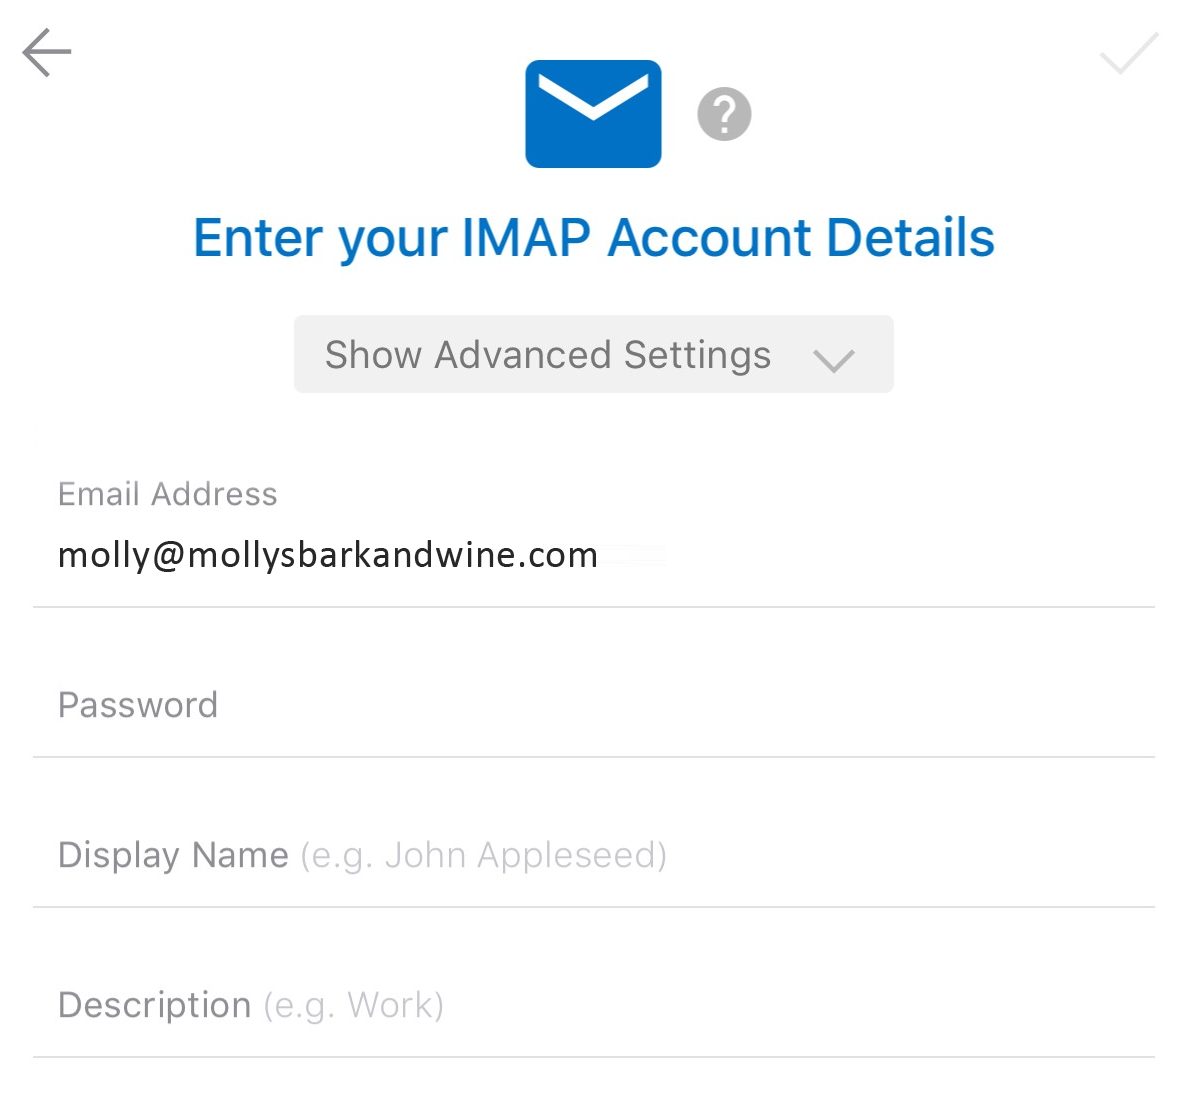 Type in email details